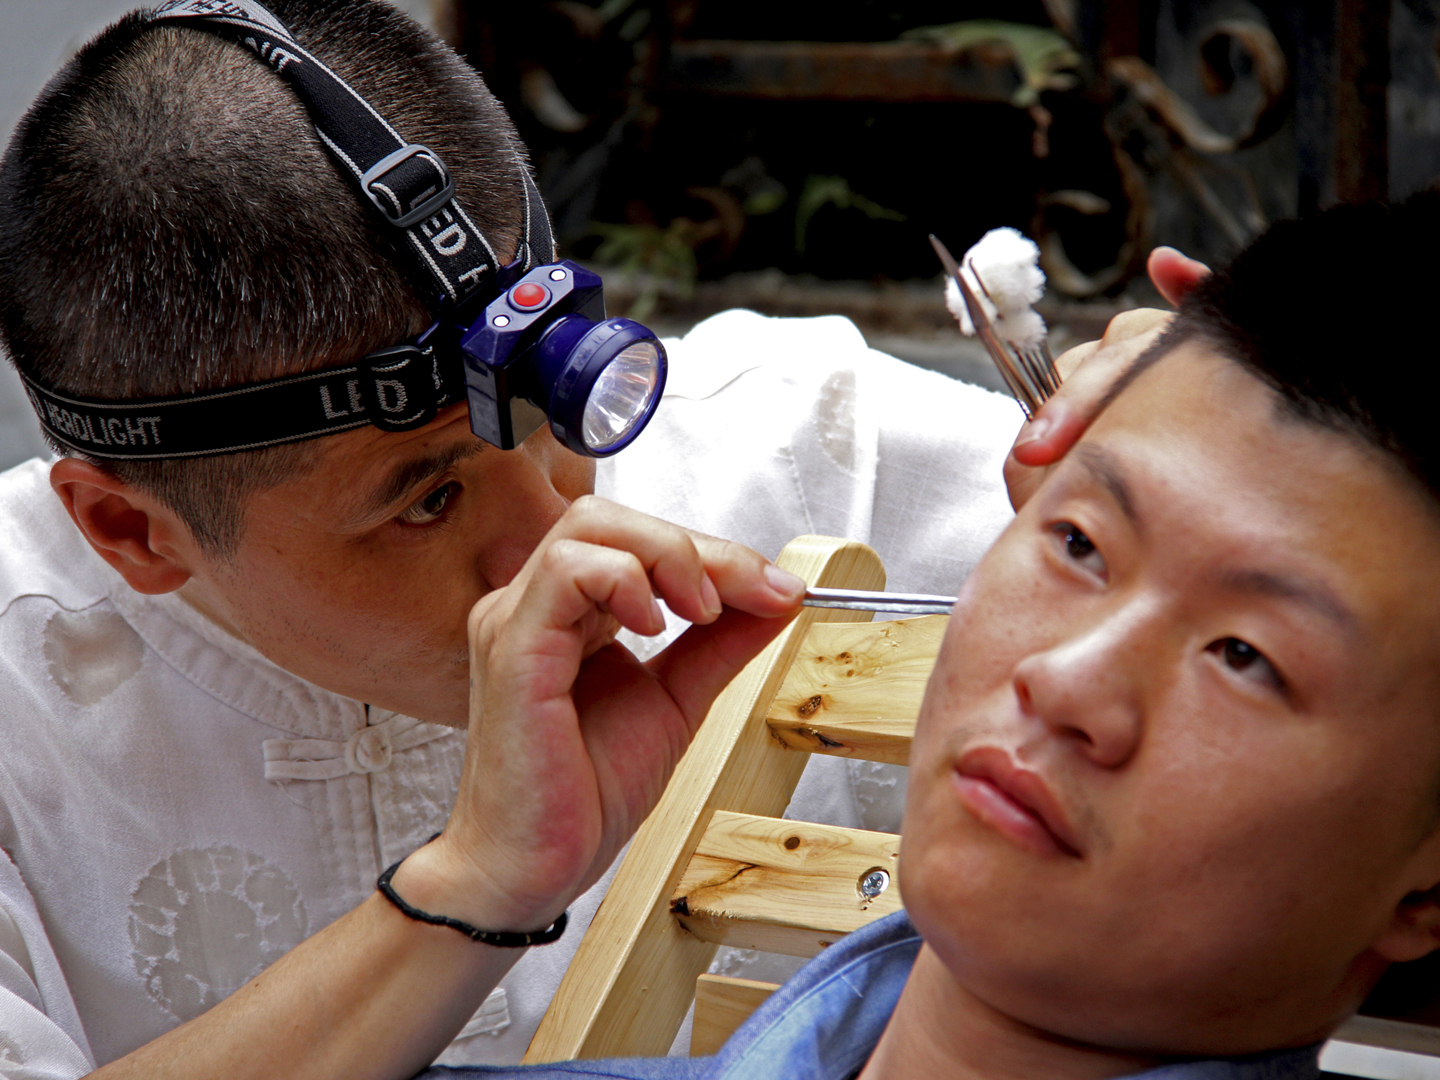 Chengdu, China - August 5, 2013: Ear Wax Removal in Chengdu marketplace